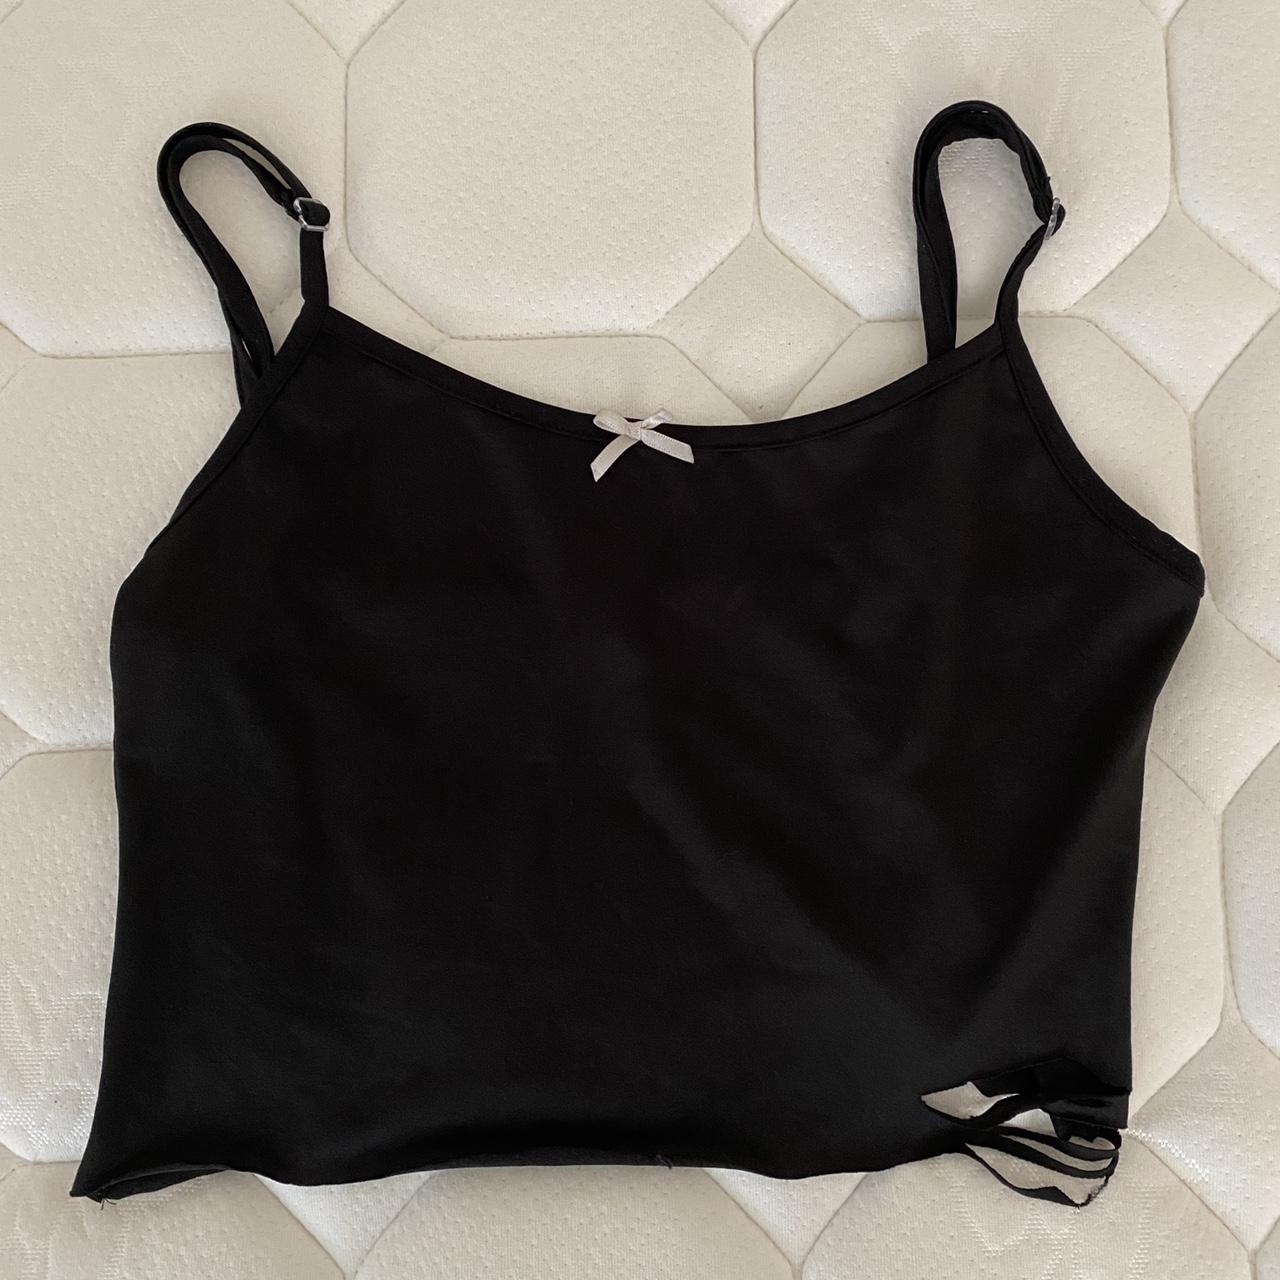 Handmade! Coquette bow tank top 🤍 This is a black... - Depop